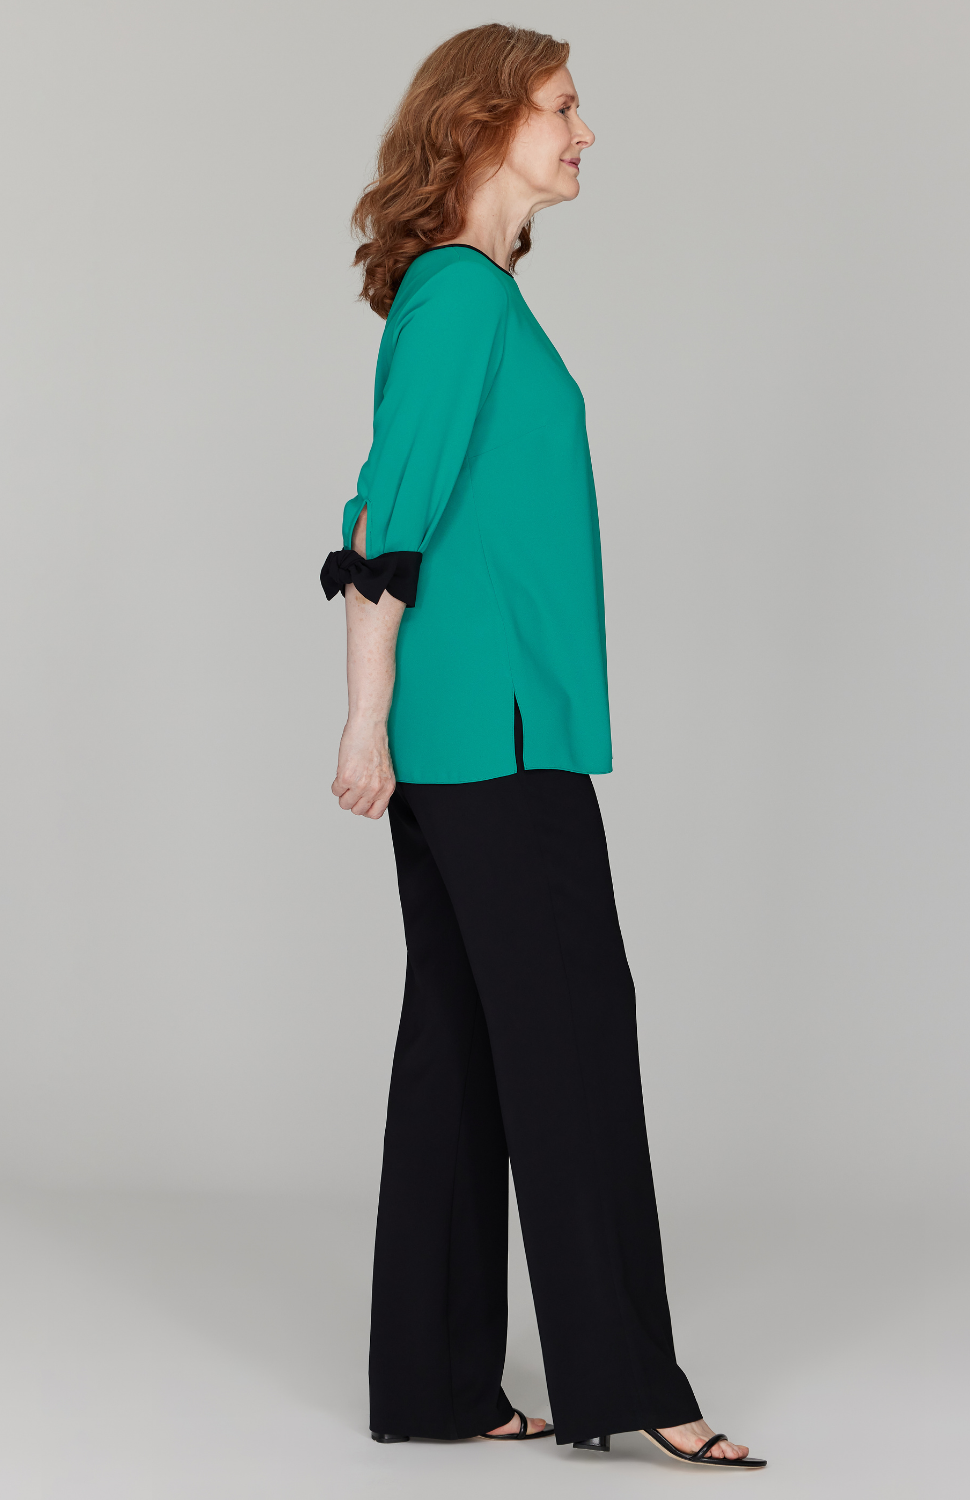 Lustrous Crepe 3/4 Sleeve Blouse with Tie Cuff